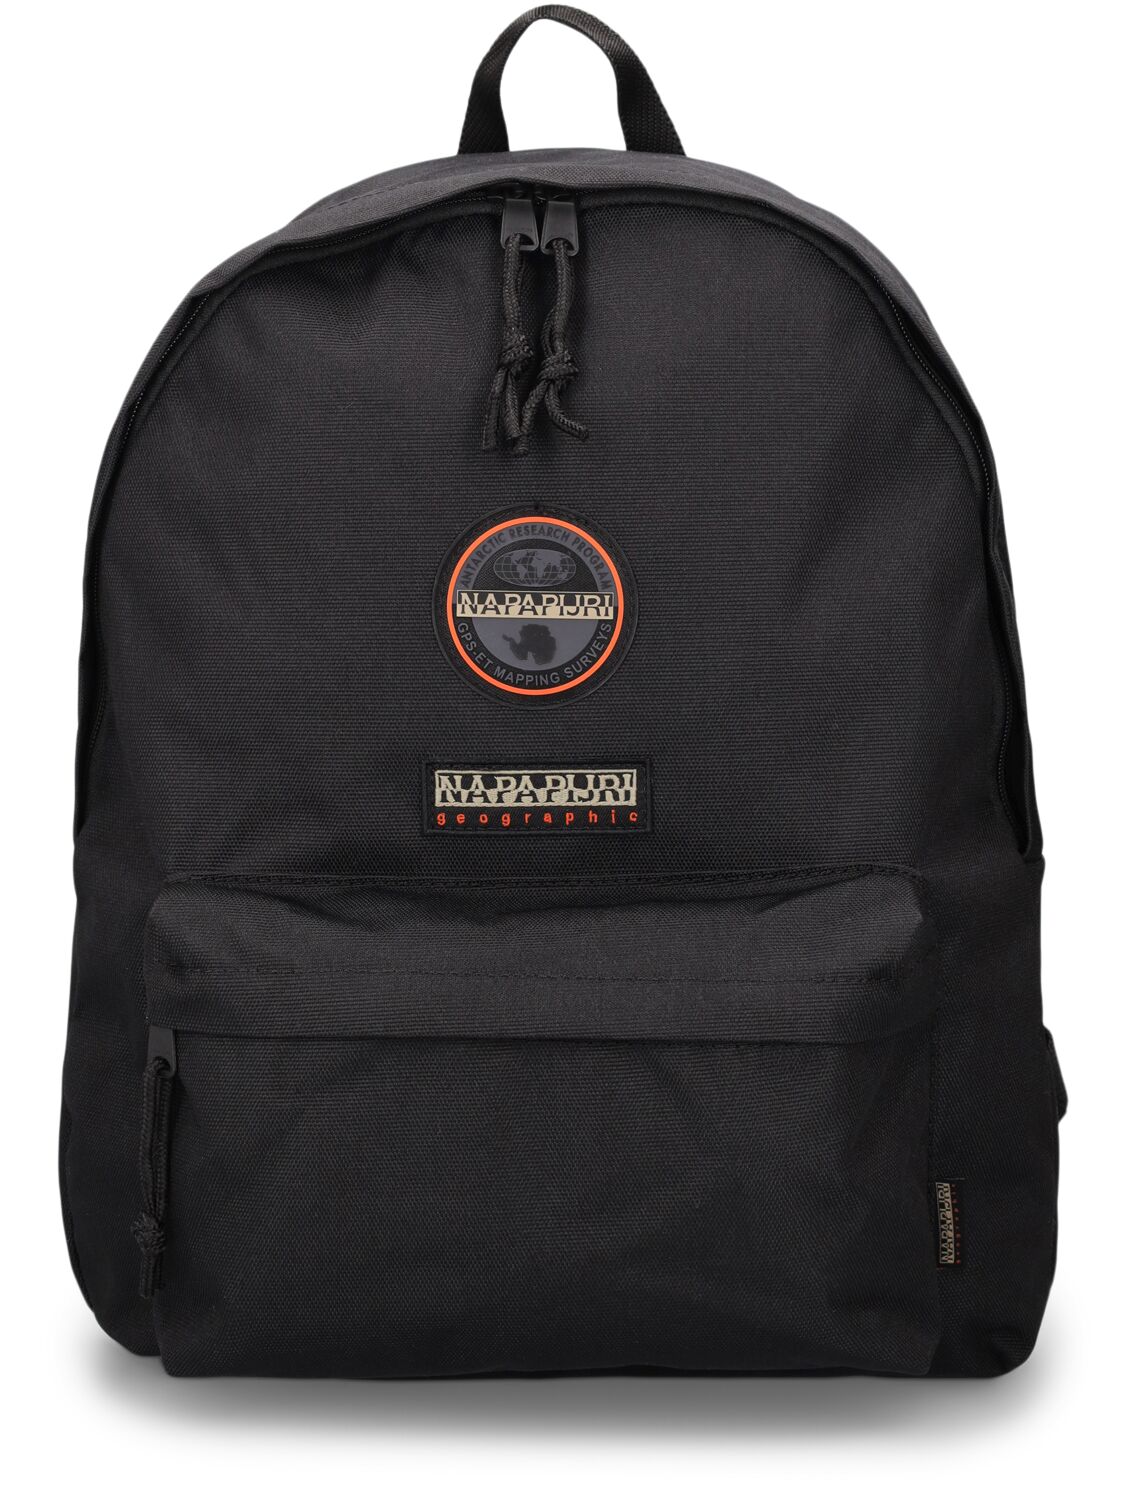 Voyage 3 Tech Backpack